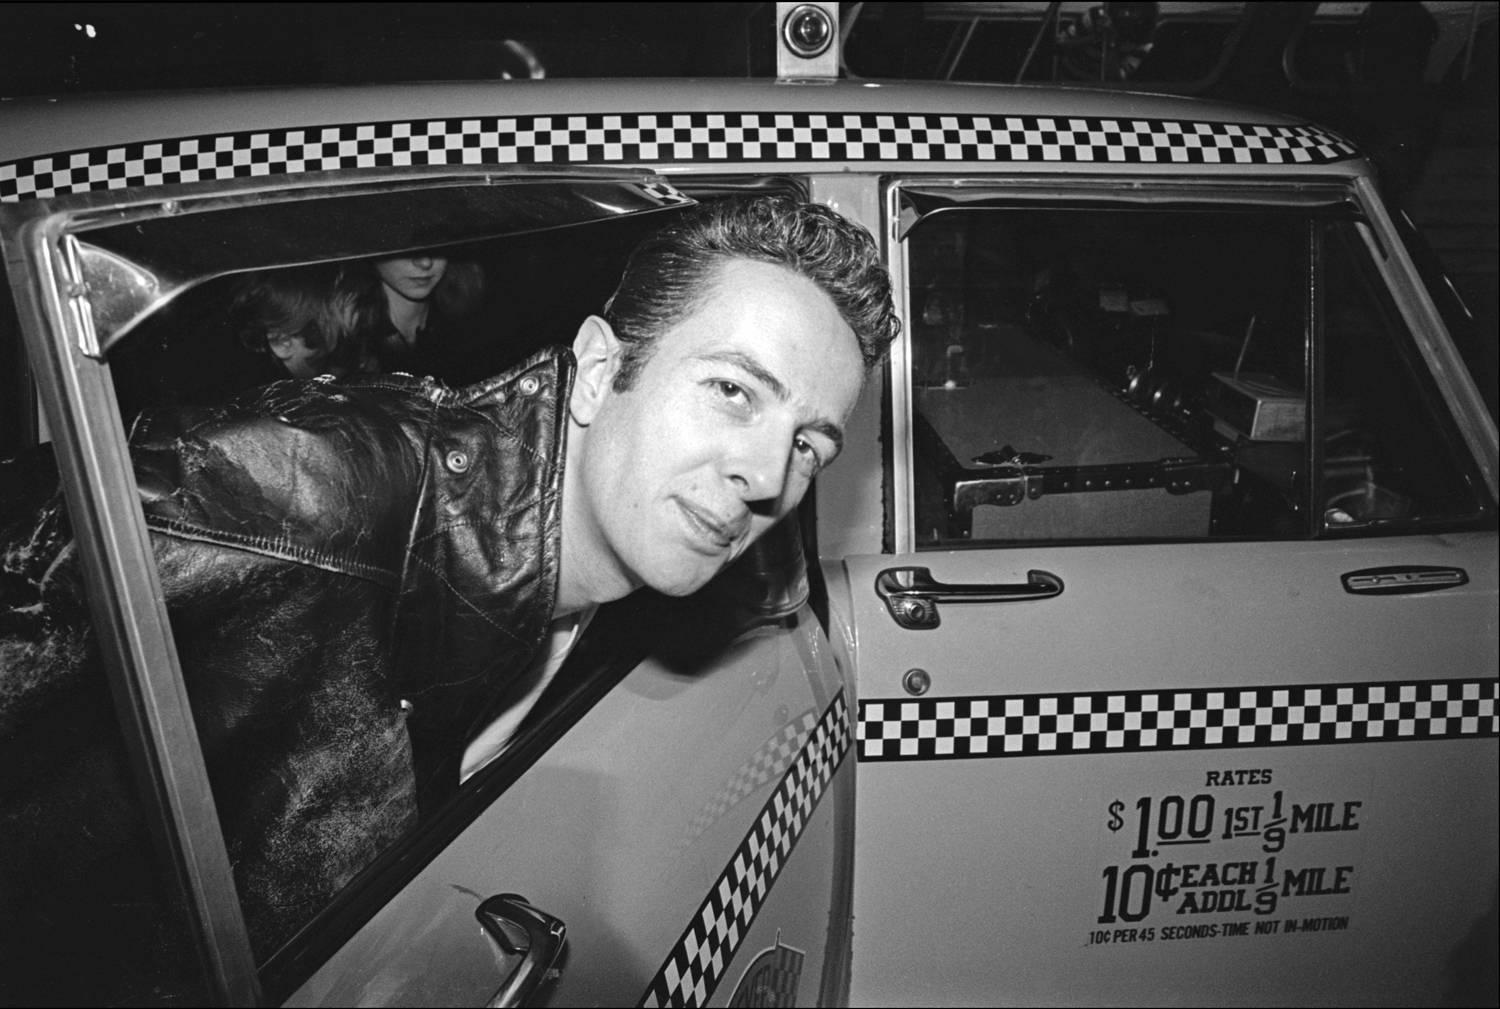 The Clash arrive at JFK - Joe Strummer getting into a taxi, 1981